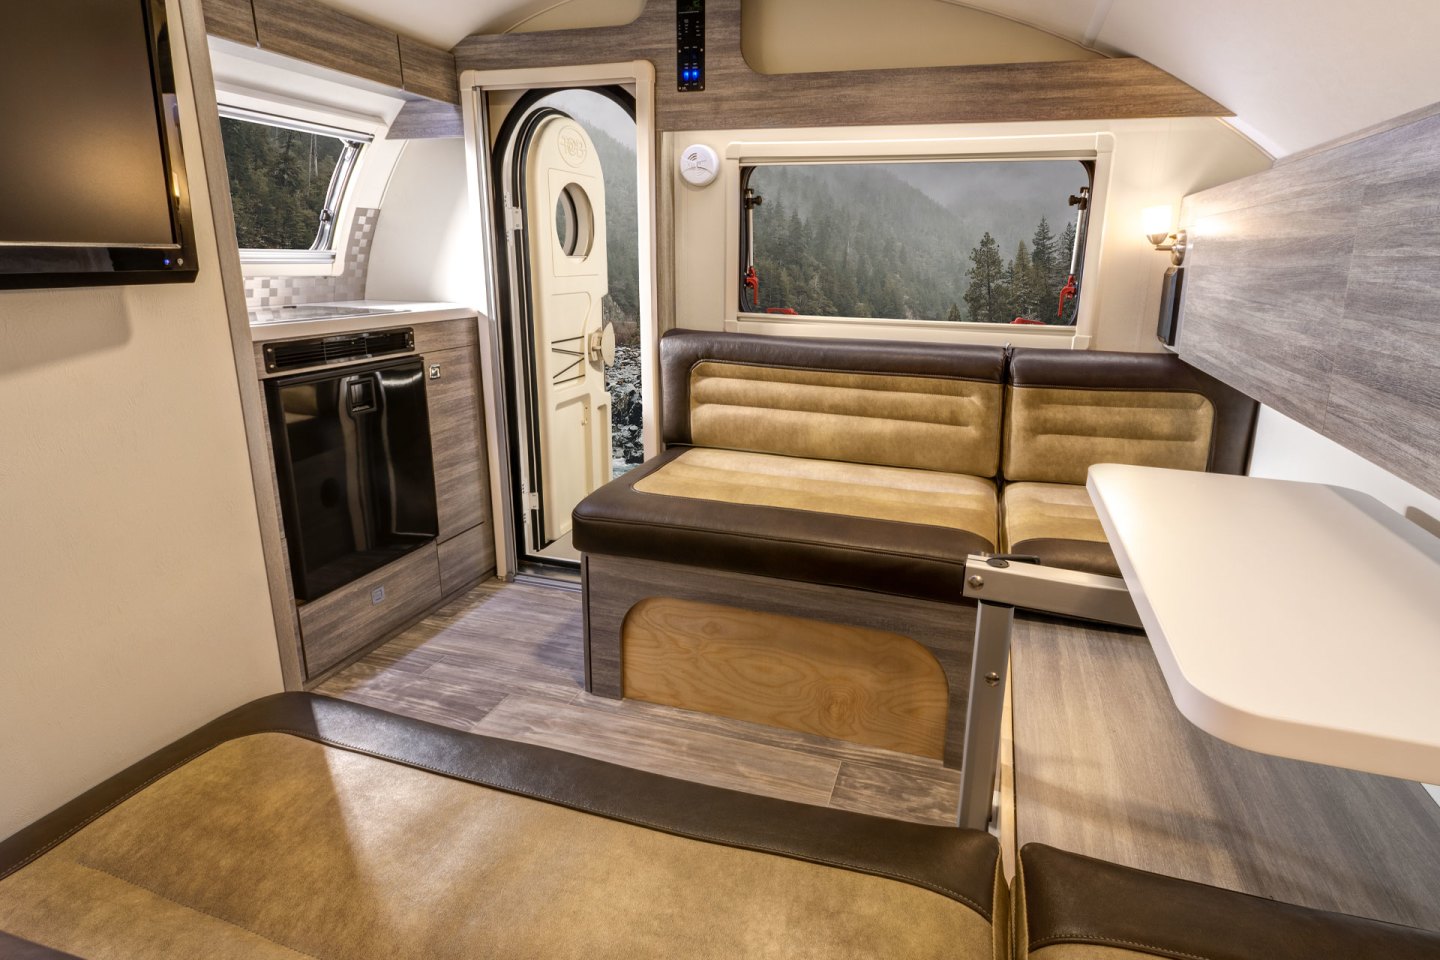 A convertible dinette inside the Ultimate Camper folds up into a queen-size bed for two